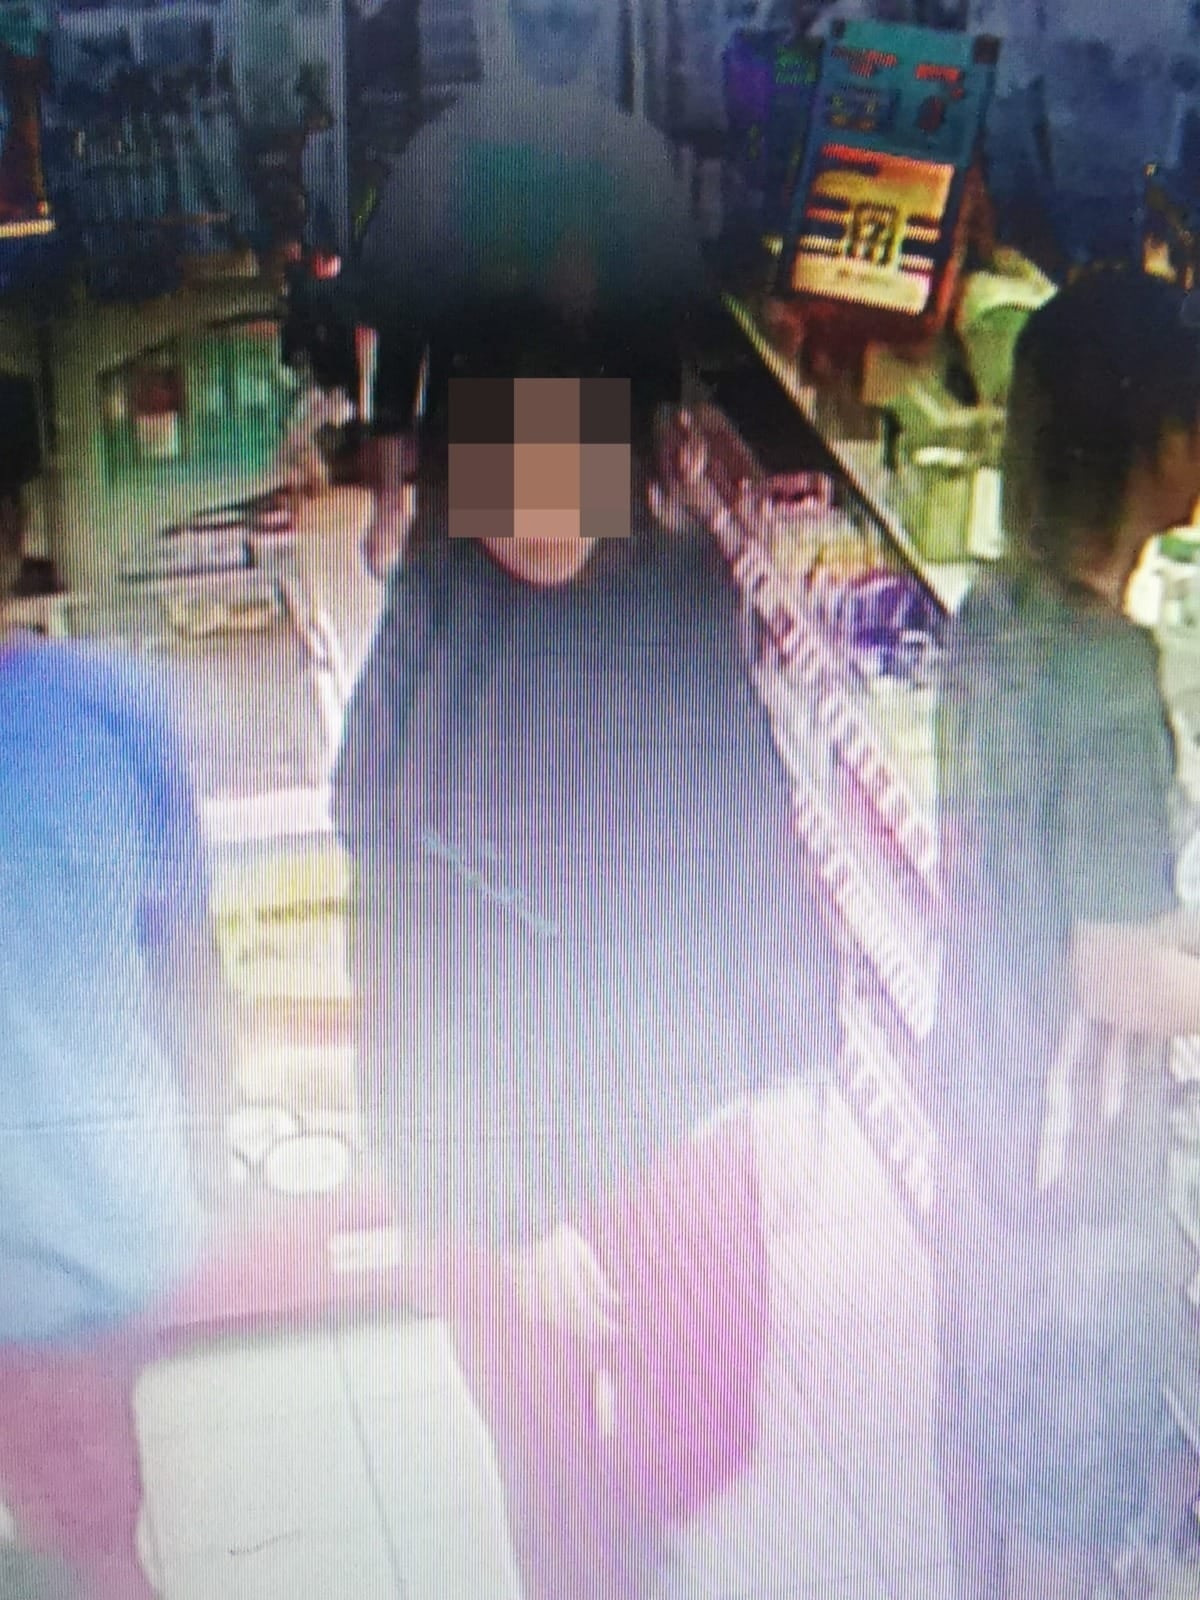 ss 7 malay family steal beer convenient store